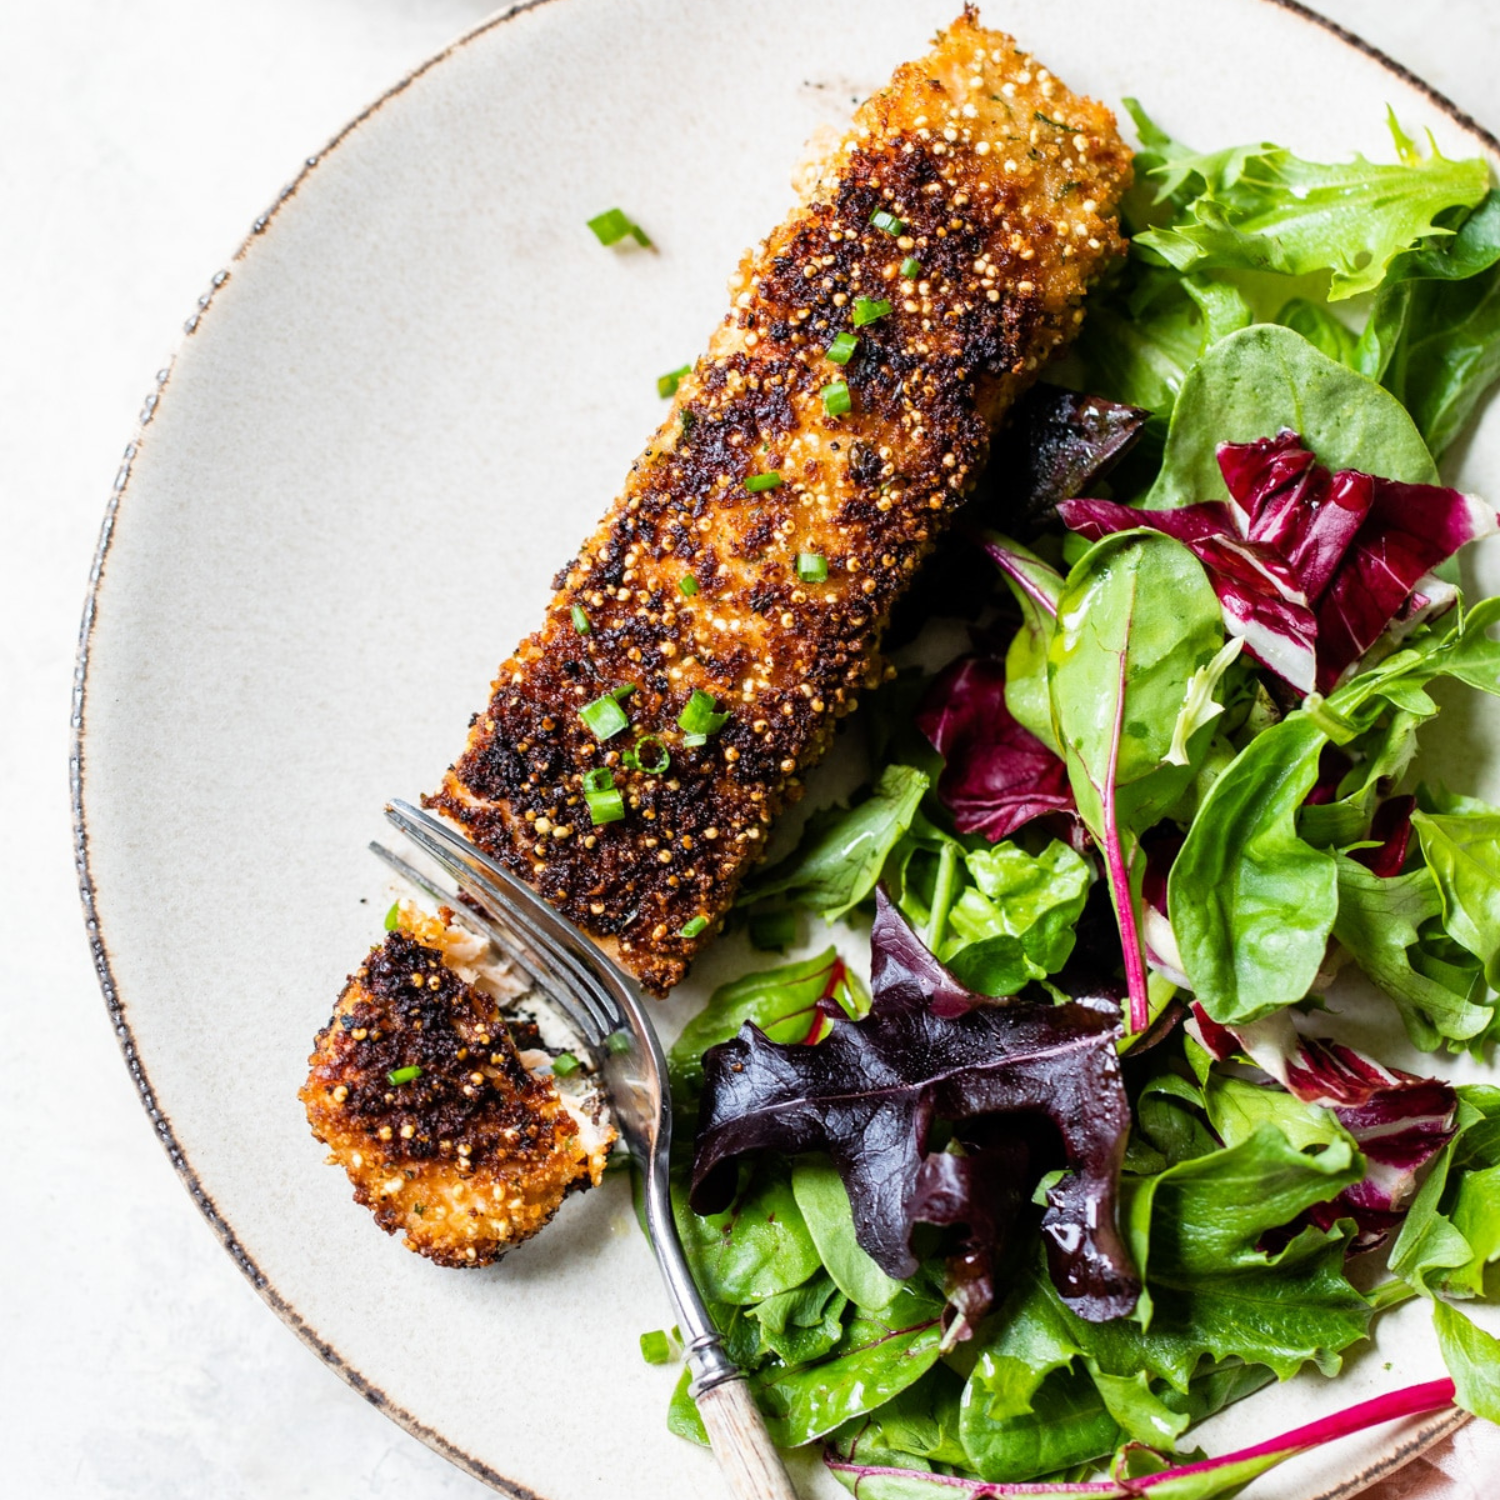 a piece of quinoa crusted salmon on a white plate with a side salad